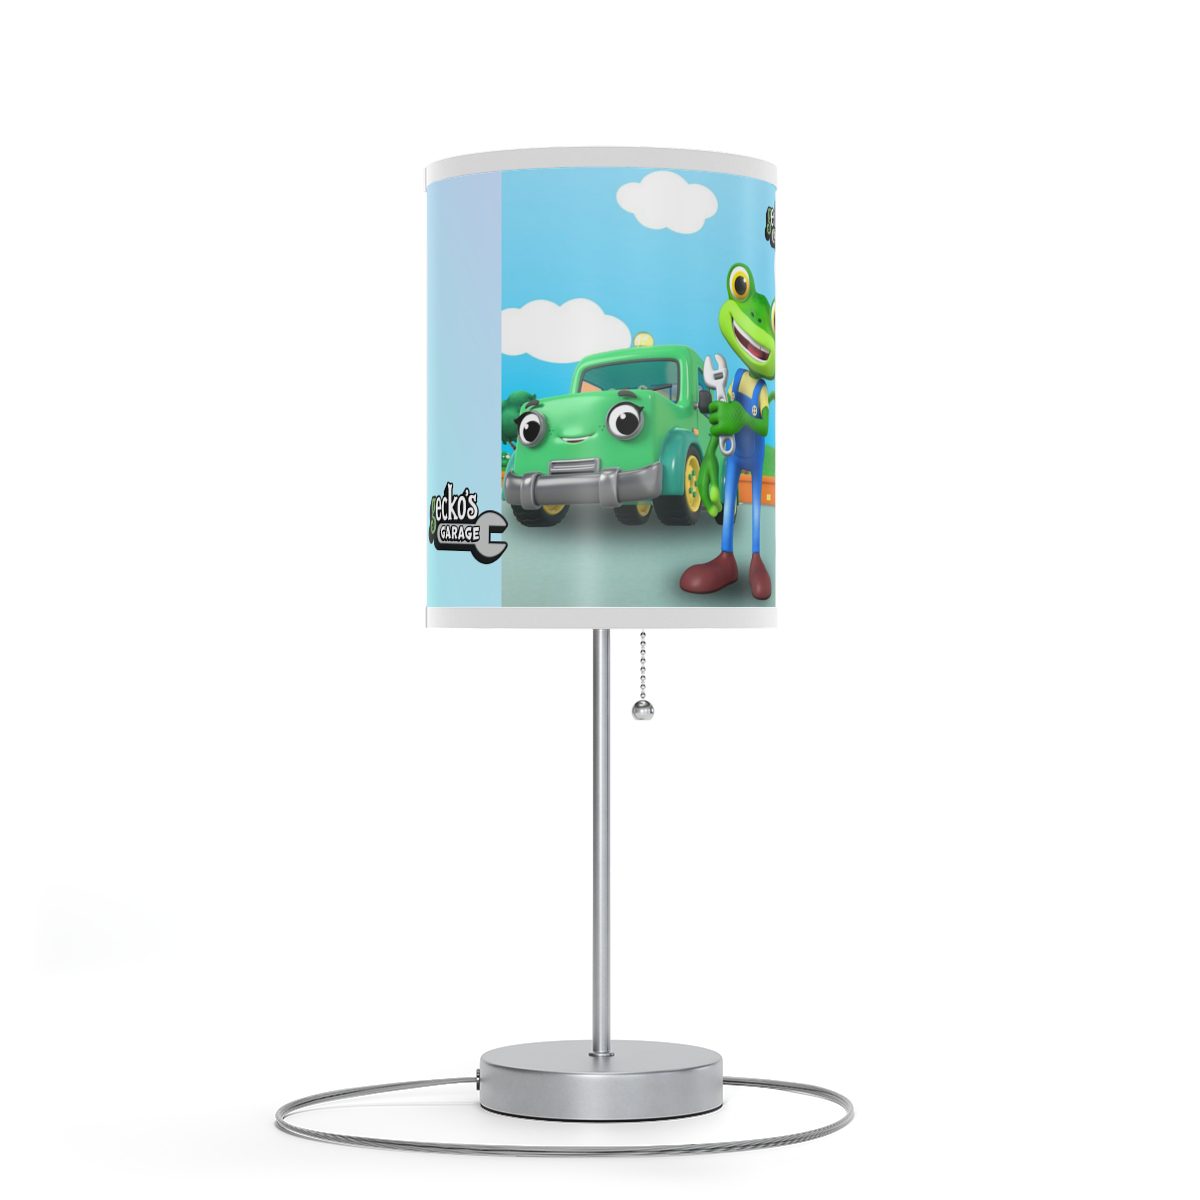 Gecko’s Garage Main Characters Lamp on a Stand Cool Kiddo 26